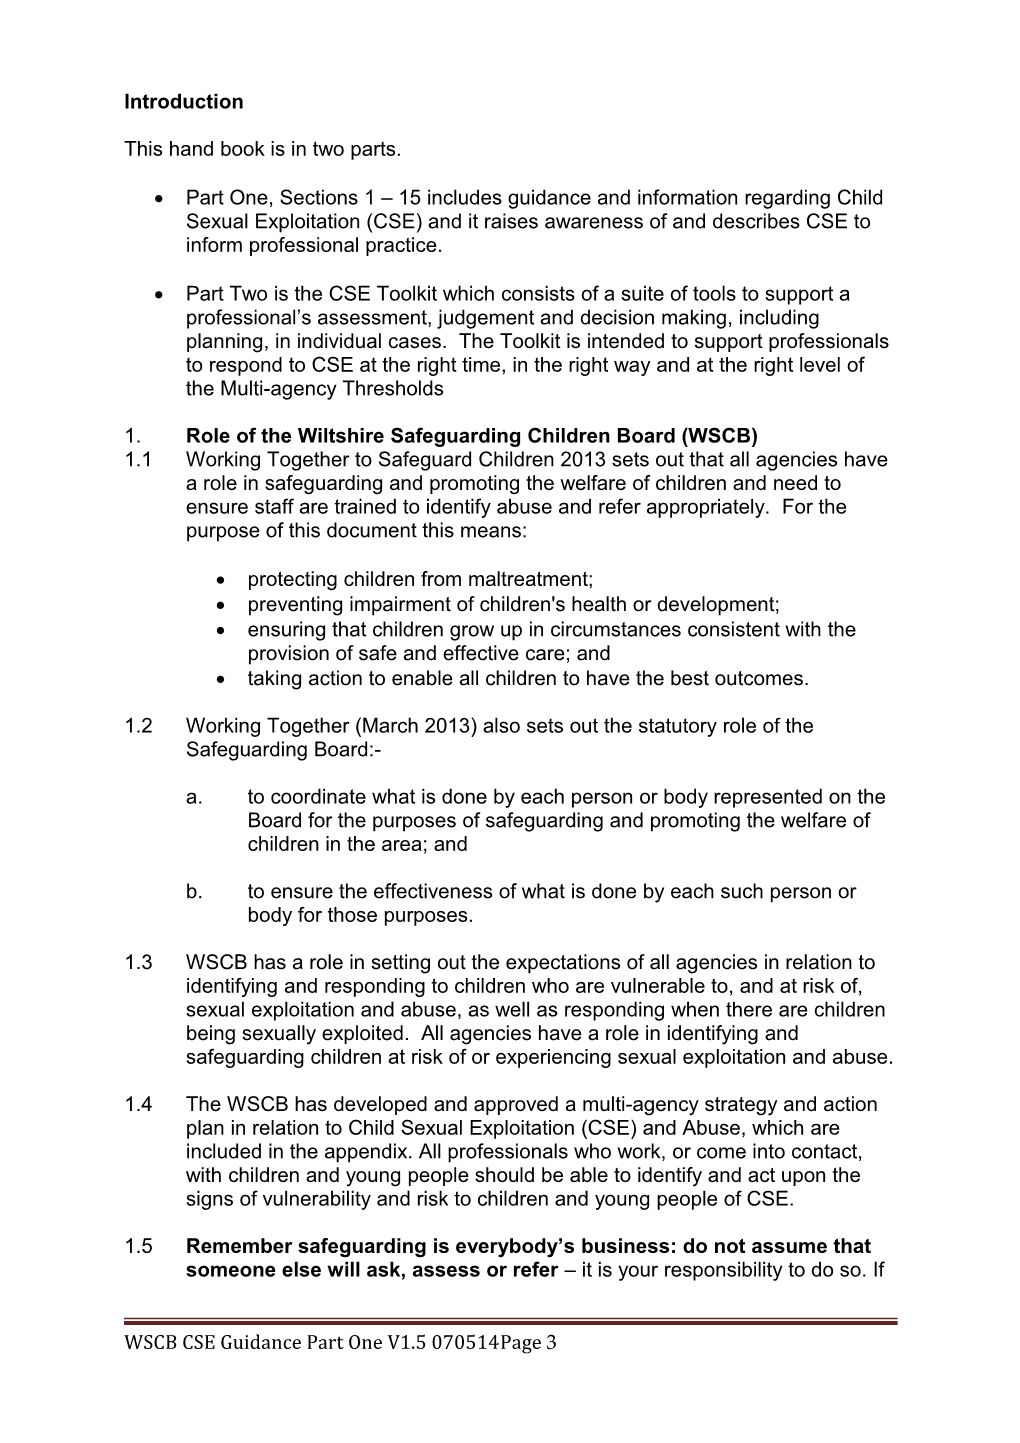 WSCB CSE Guidance Part One V1.5 070514Page 1